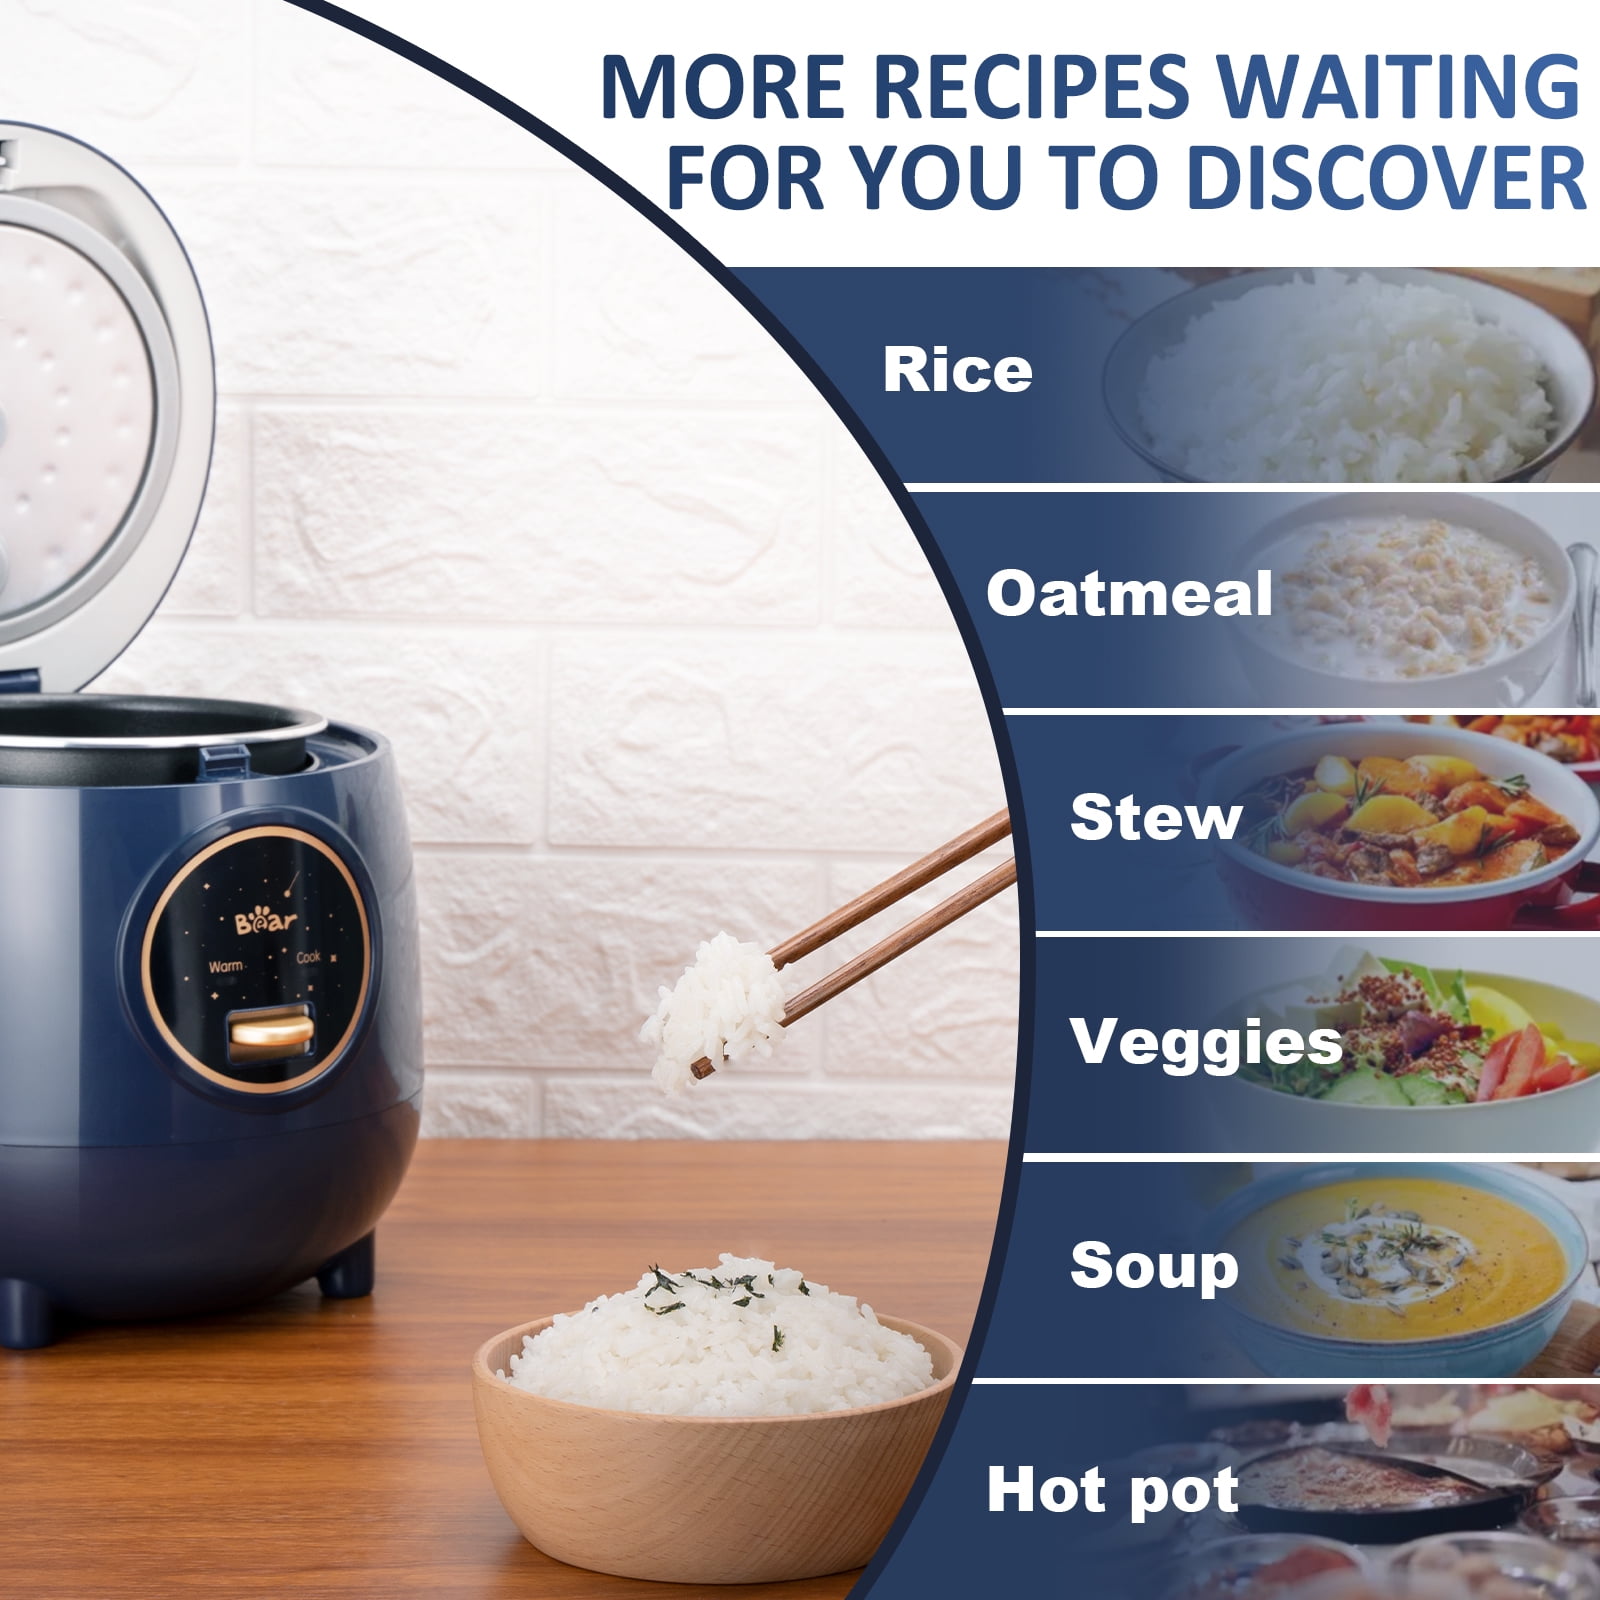 Bear Rice Cooker 3 Cups (Uncooked), Fast Electric Pressure Cooker, Portable  Multi Cooker with 10 Menu Settings for White/Brown Rice Oatmeal and More,  Nonstick Inner Pot